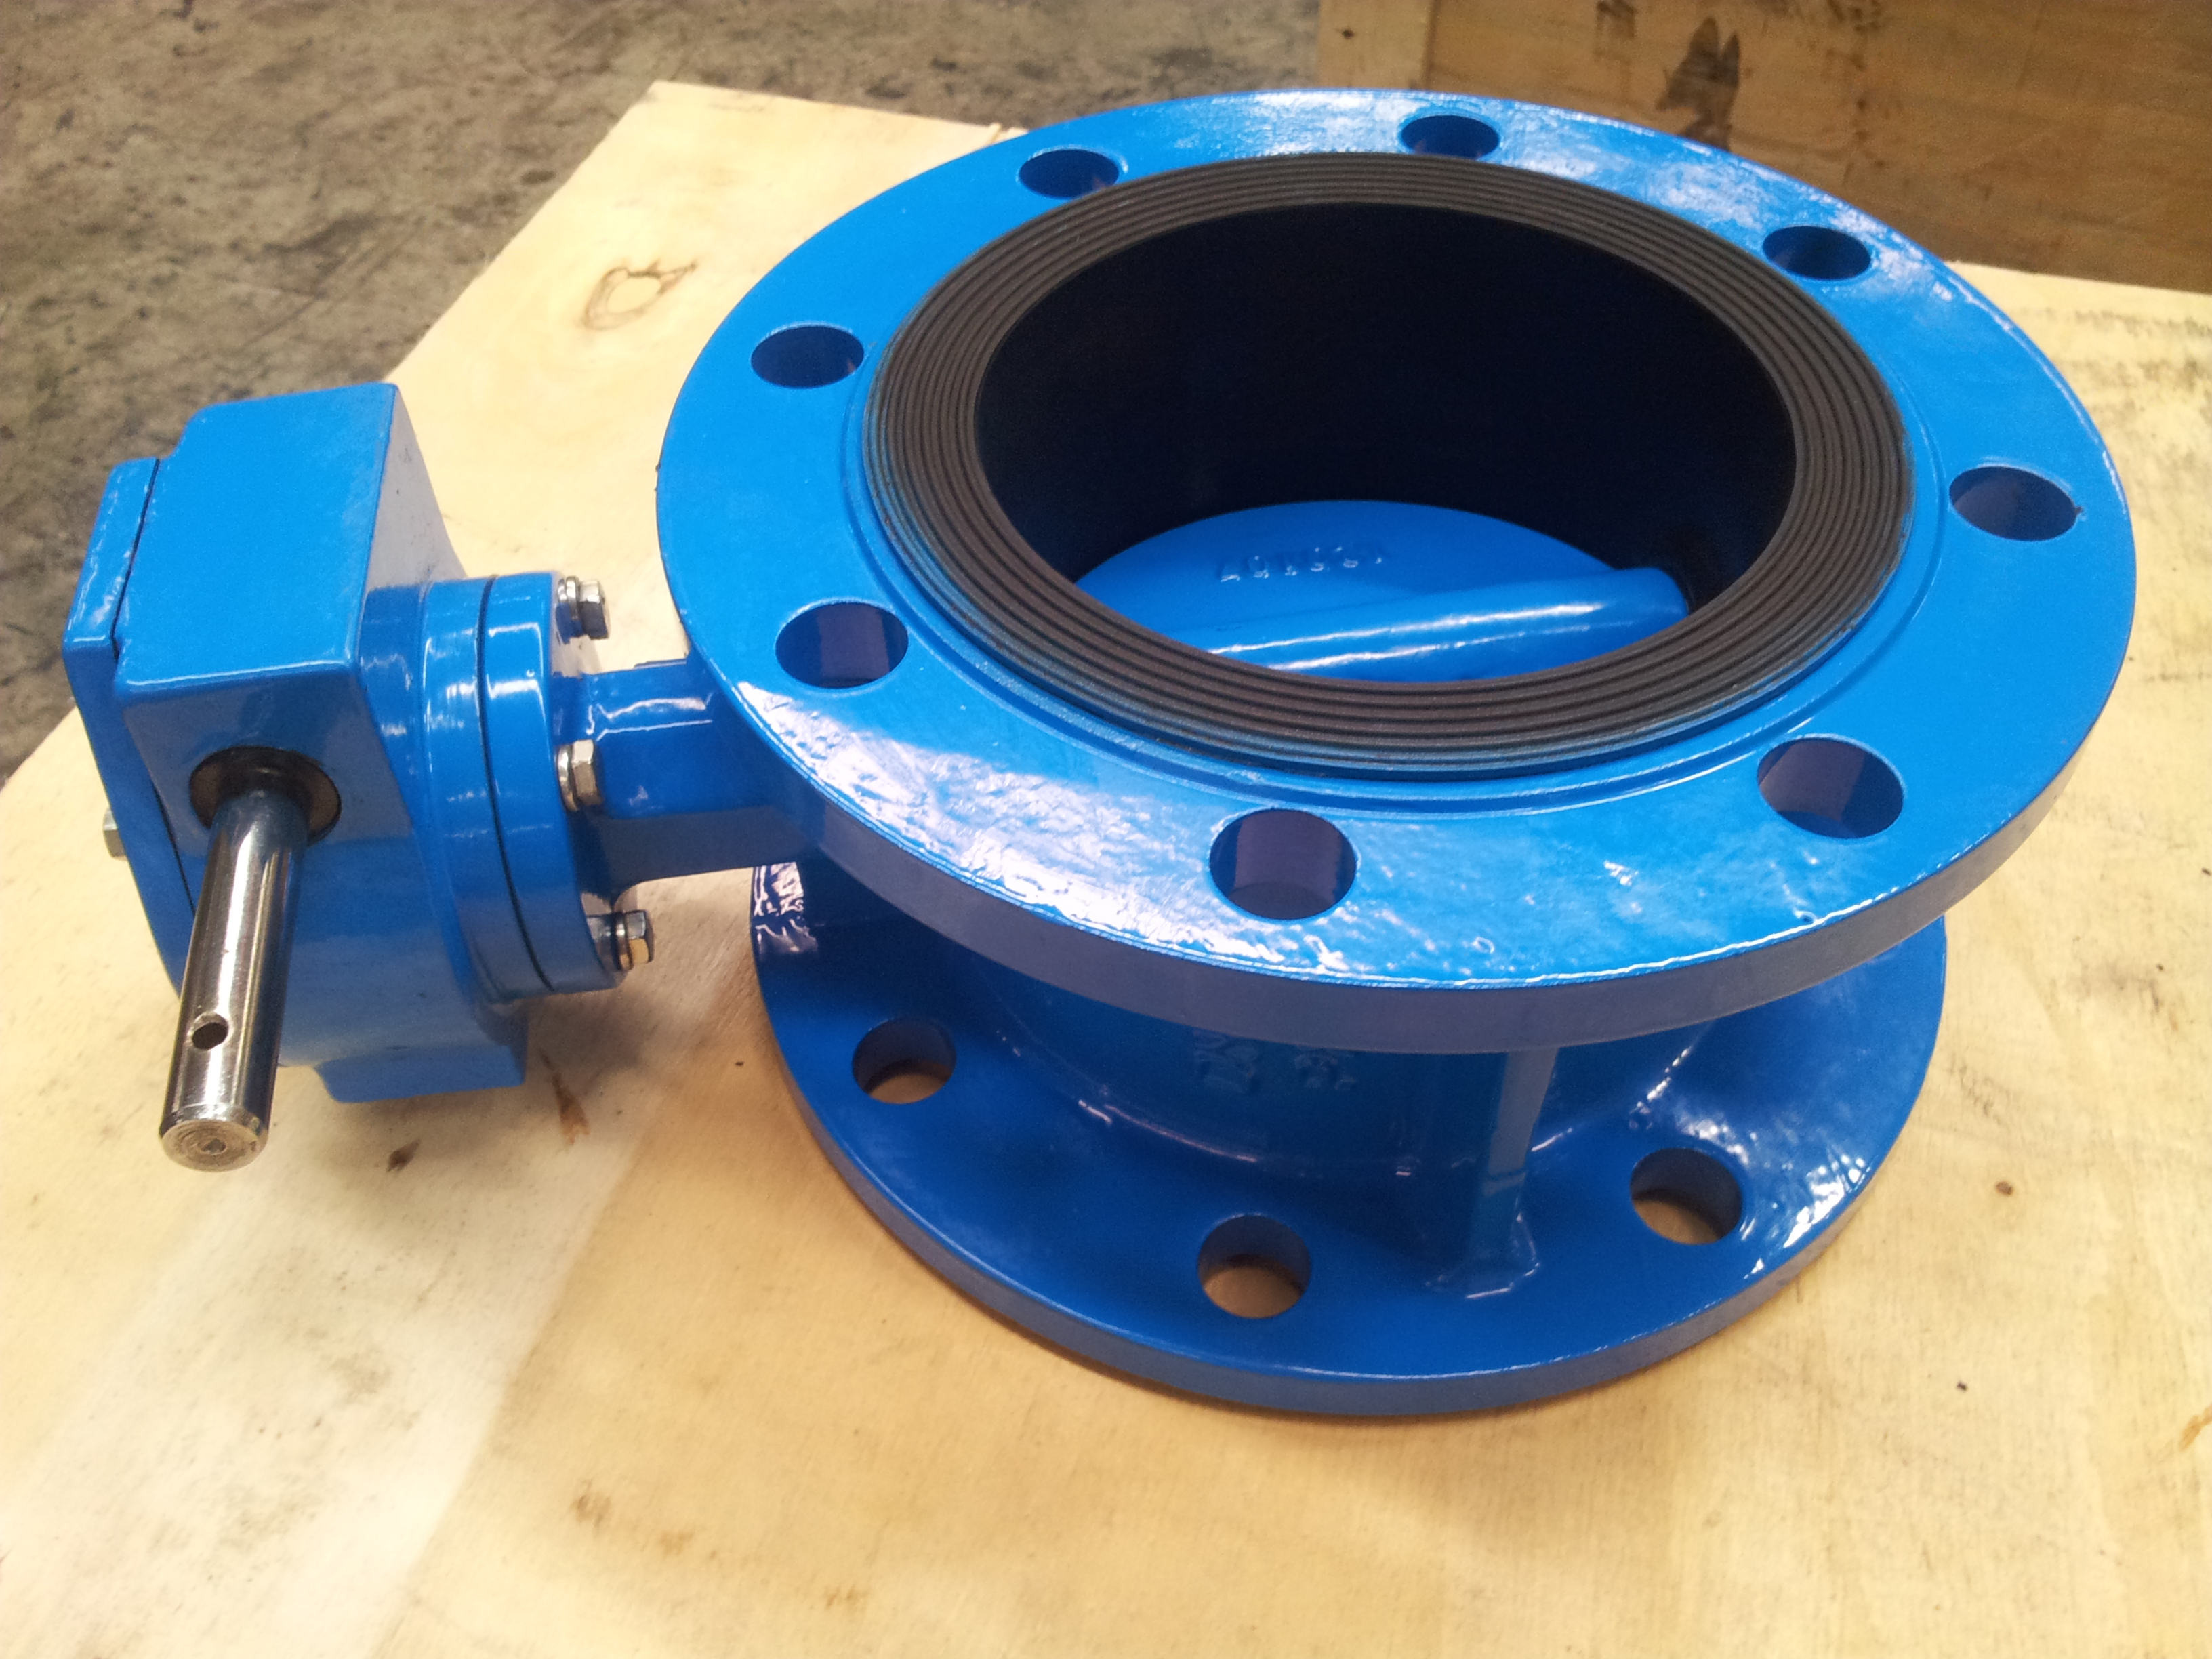 OEM Flanged Concentric Butterfly Valve Pn16 Gearbox na may Handwheel Operated